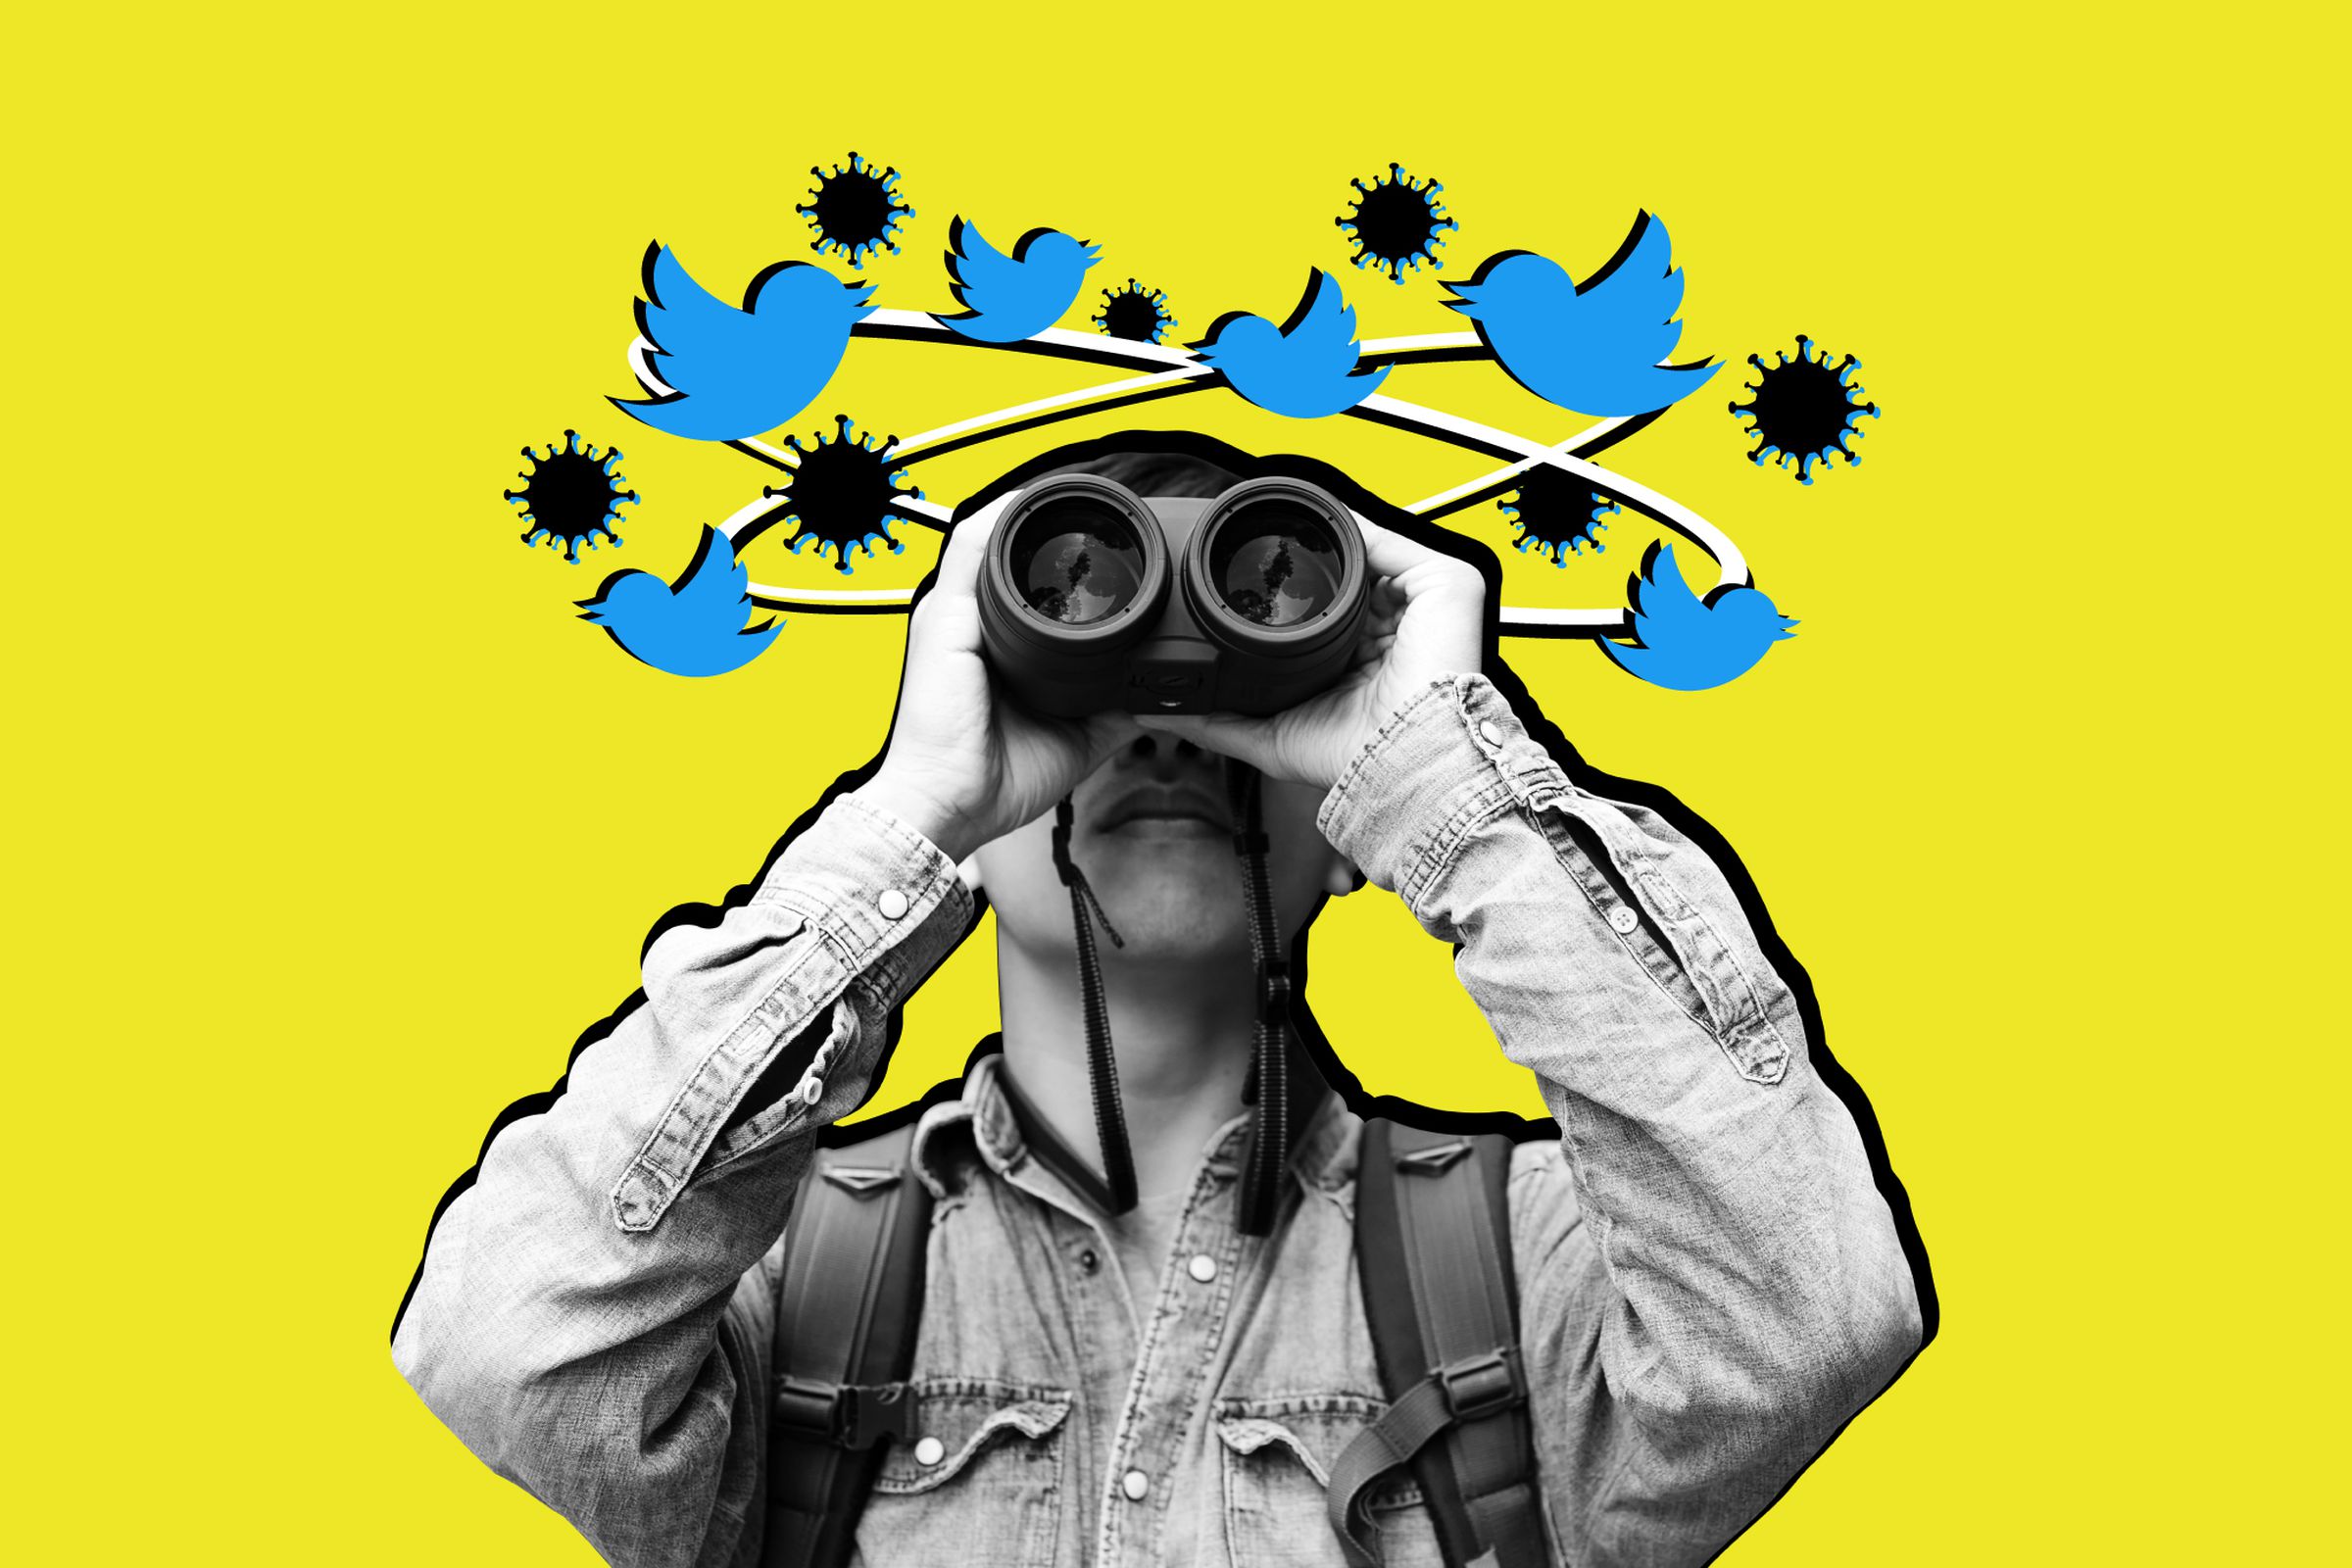 Photo illustration of a person with binoculars looking towards the viewer, while a circle of birds made of the Twitter logo flies around their head.